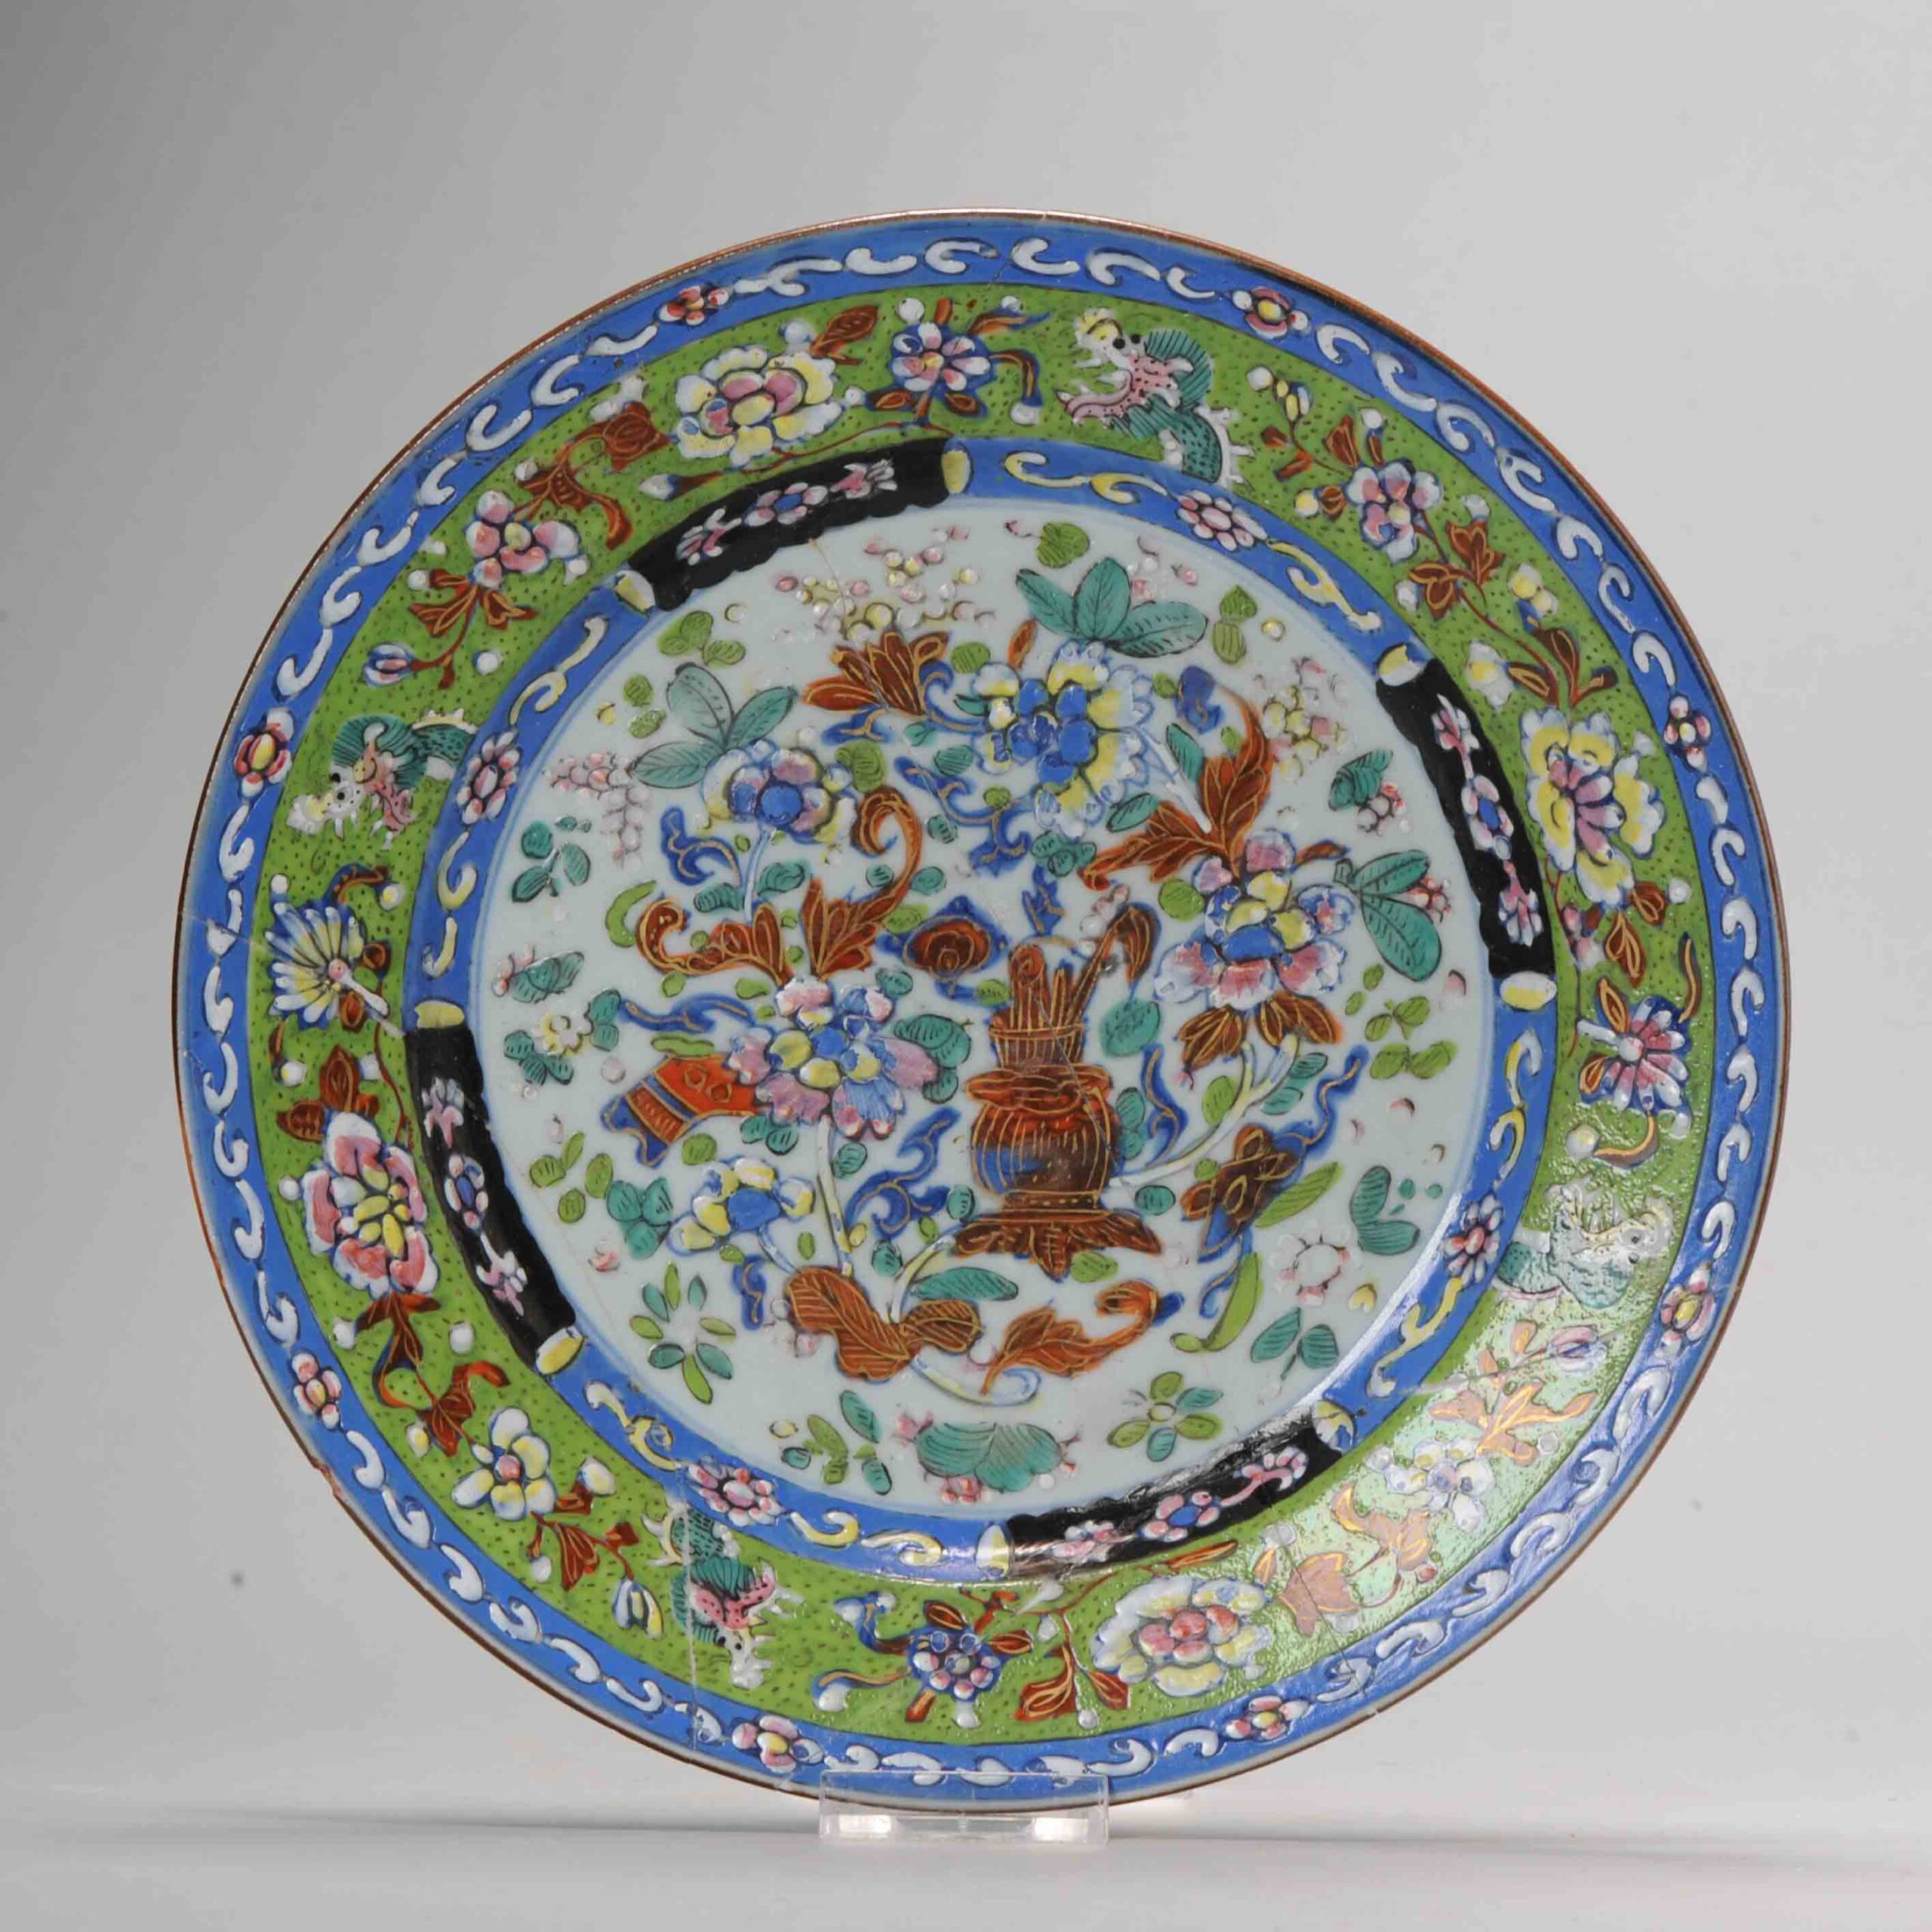 1085 Very nice decorated clobbered plate. Decorated with a underglaze in China. Overglaze red and gold, blue and black